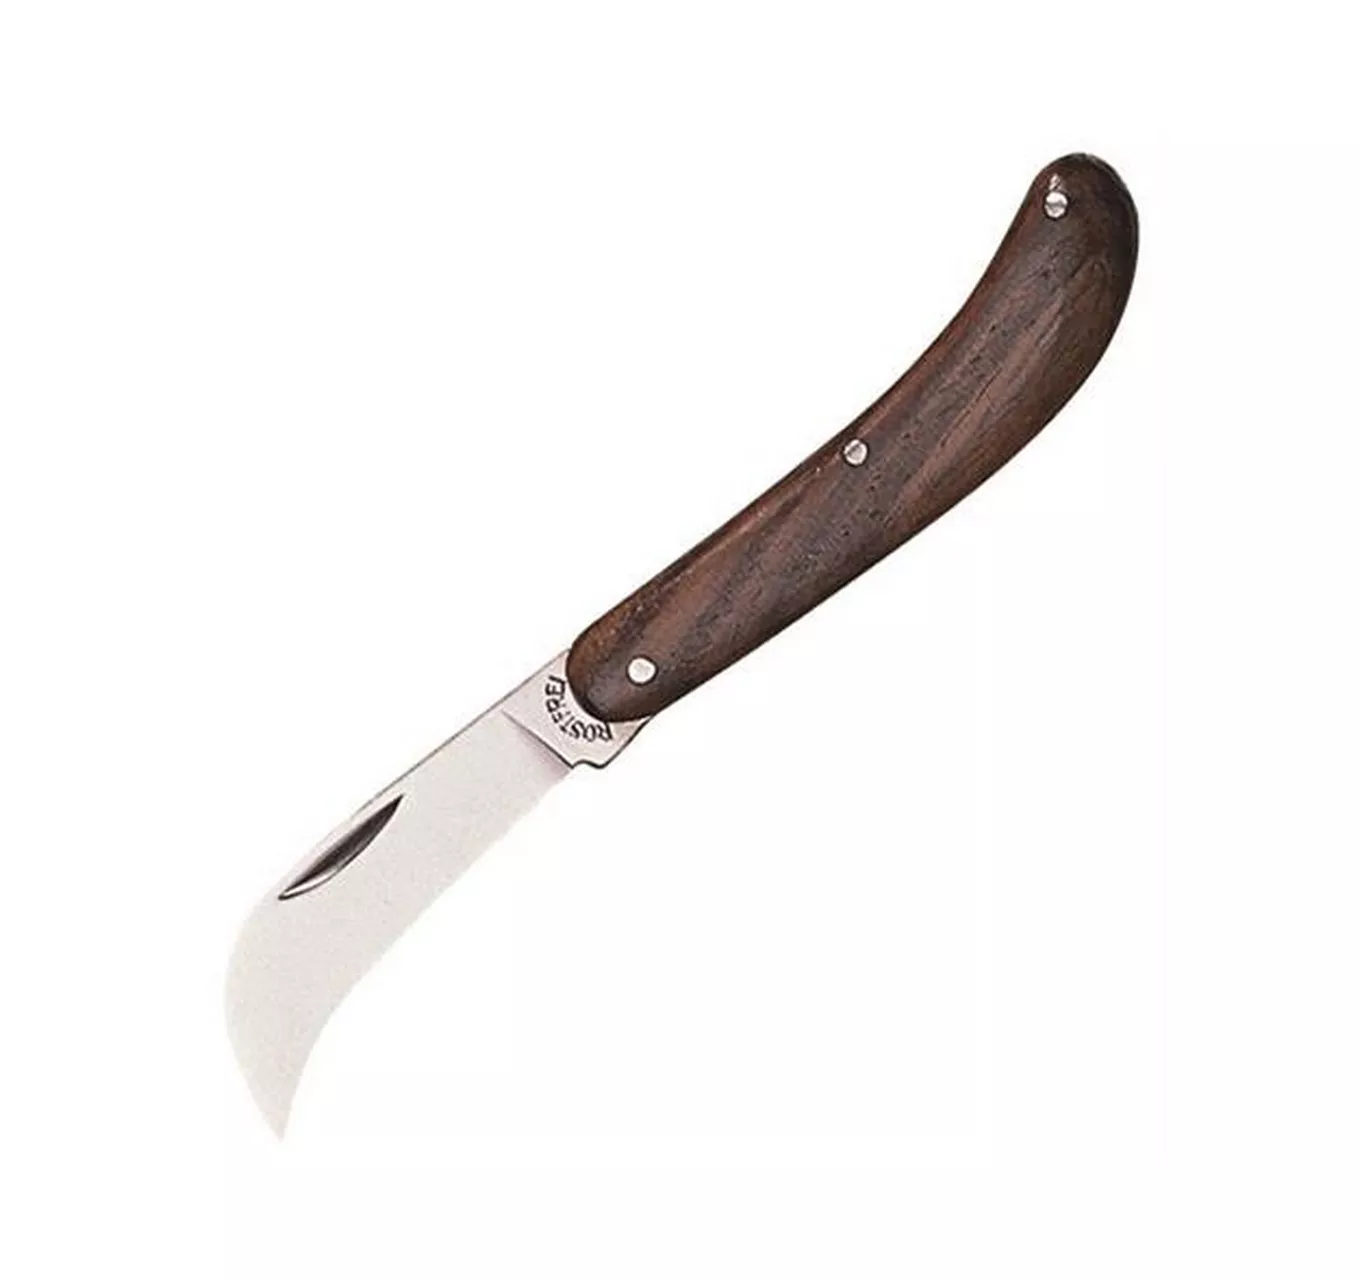 Whitby Pruning Knife 2"